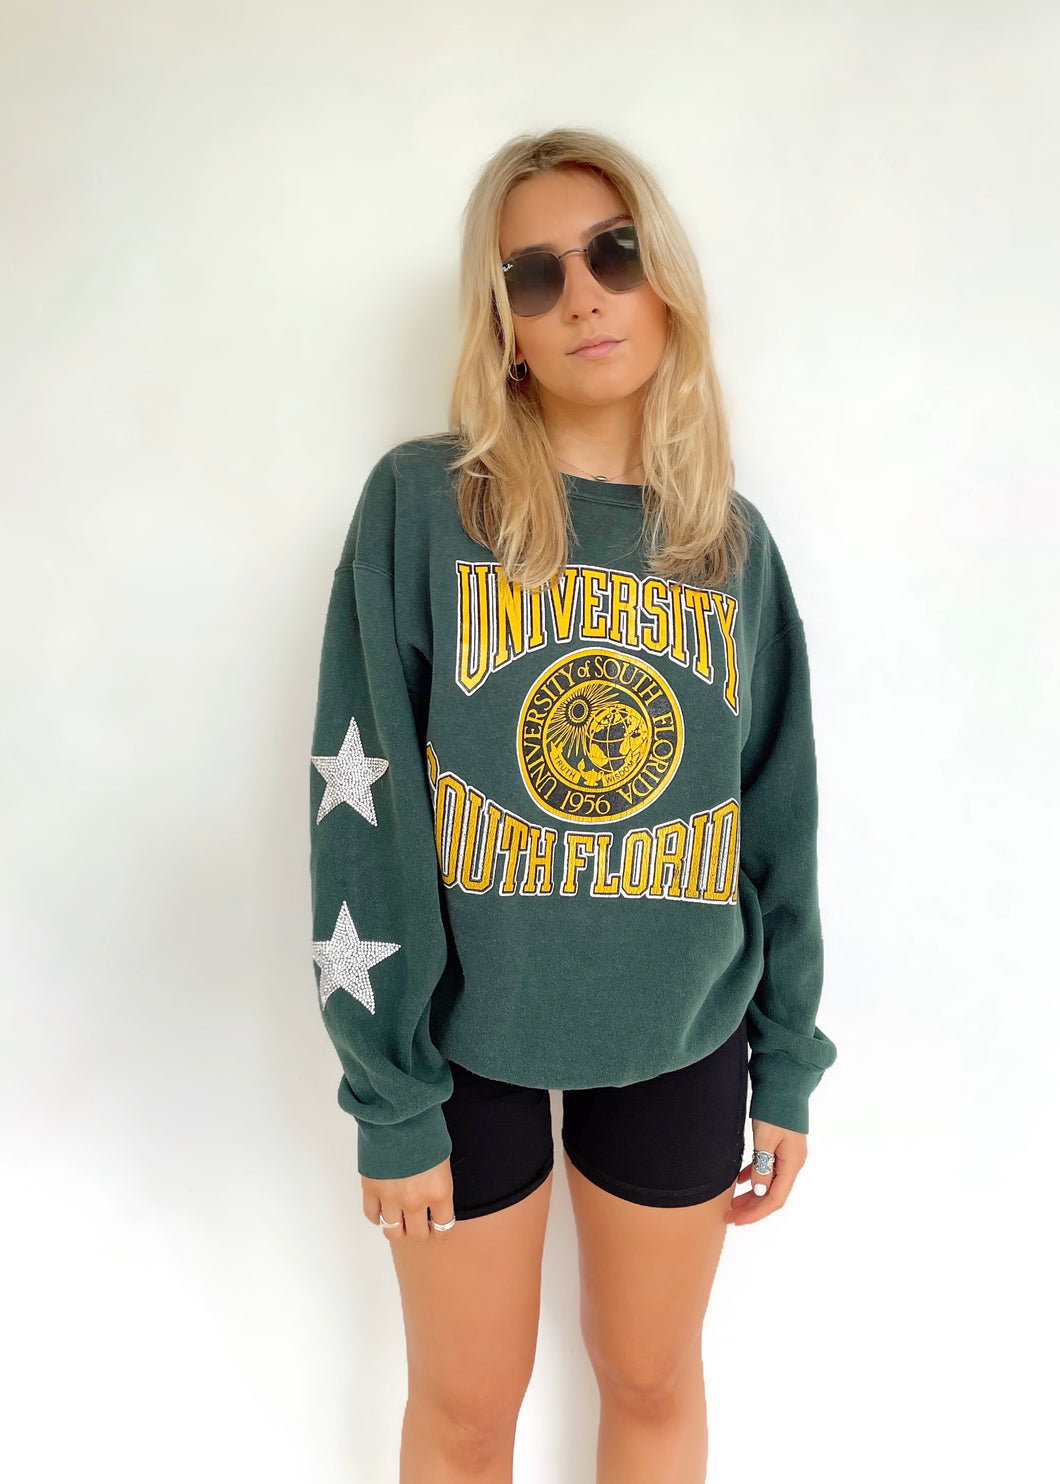 University of South Florida, One of a KIND Vintage USF Sweatshirt with Crystal Star Design